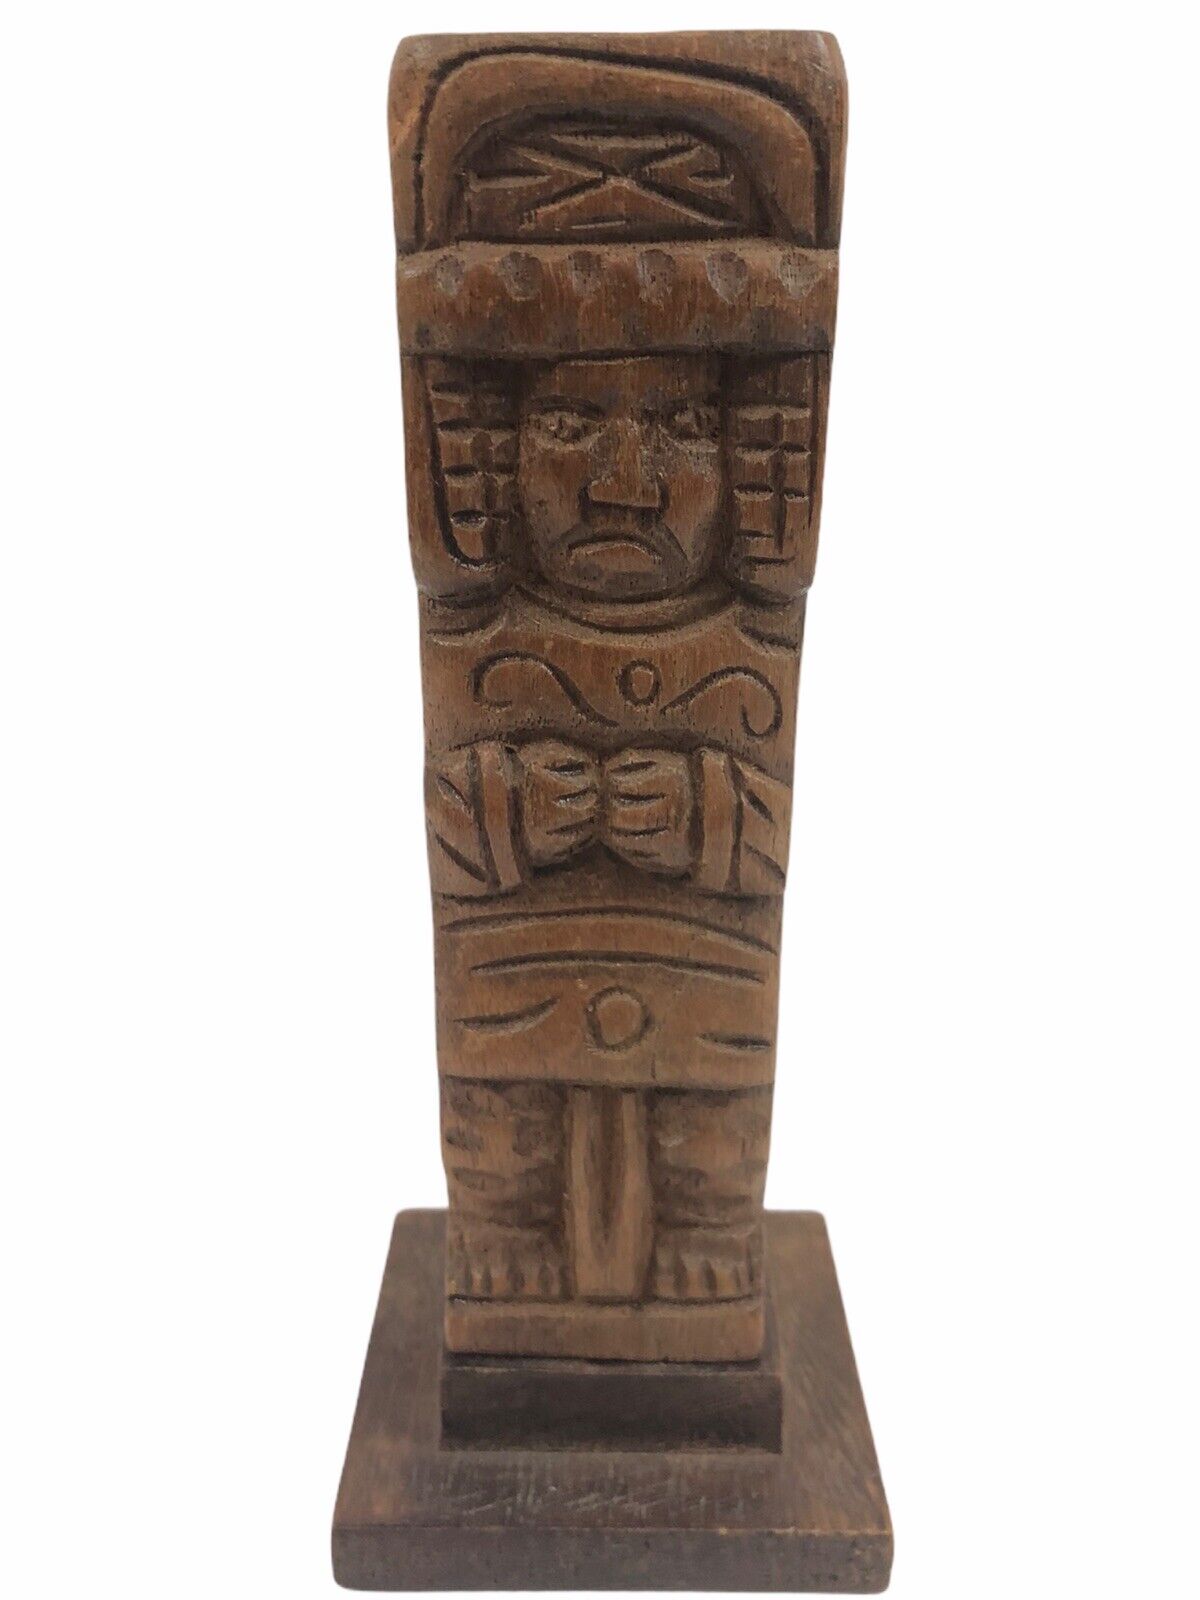 VINTAGE HAND CARVED WOOD MAN FACE  MADE IN HONDURAS